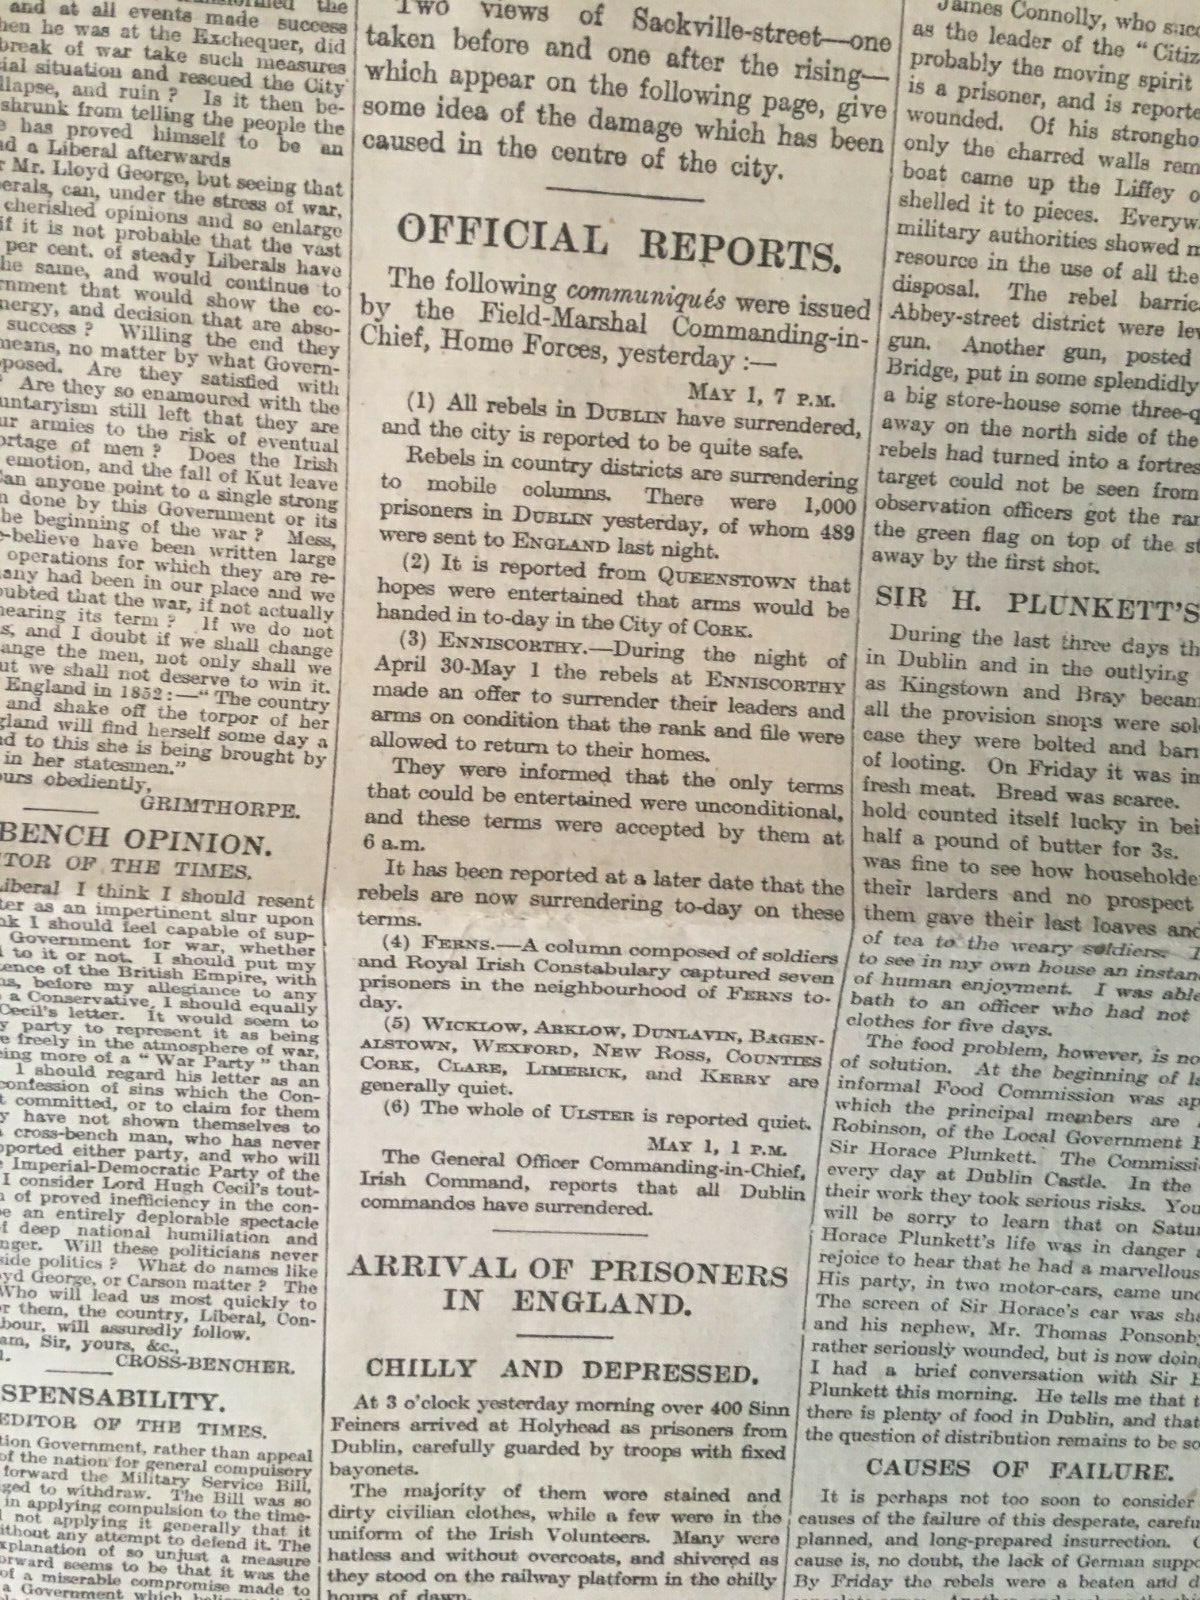 Easter Rising Rebellion 1916 Original Complete Newspaper 2nd May Images & Reports - Image 10 of 12